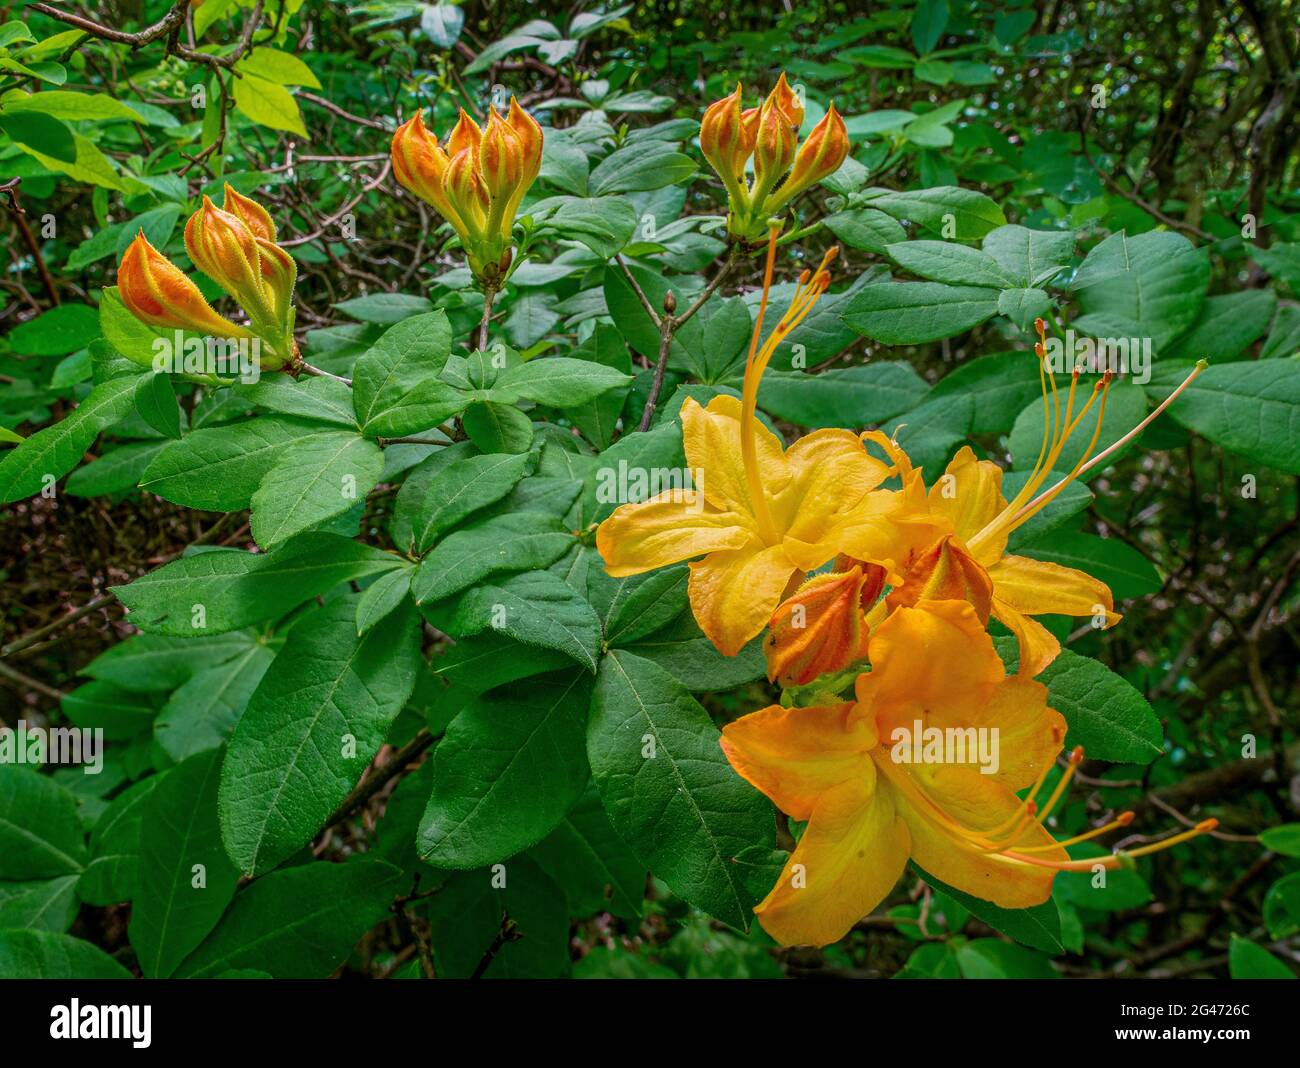 Flowers and flower buds of flame azalea (Rhododendron calendulaceum) in Grayson Highlands State Park in southwesterm Virginia in mid-June. Stock Photo